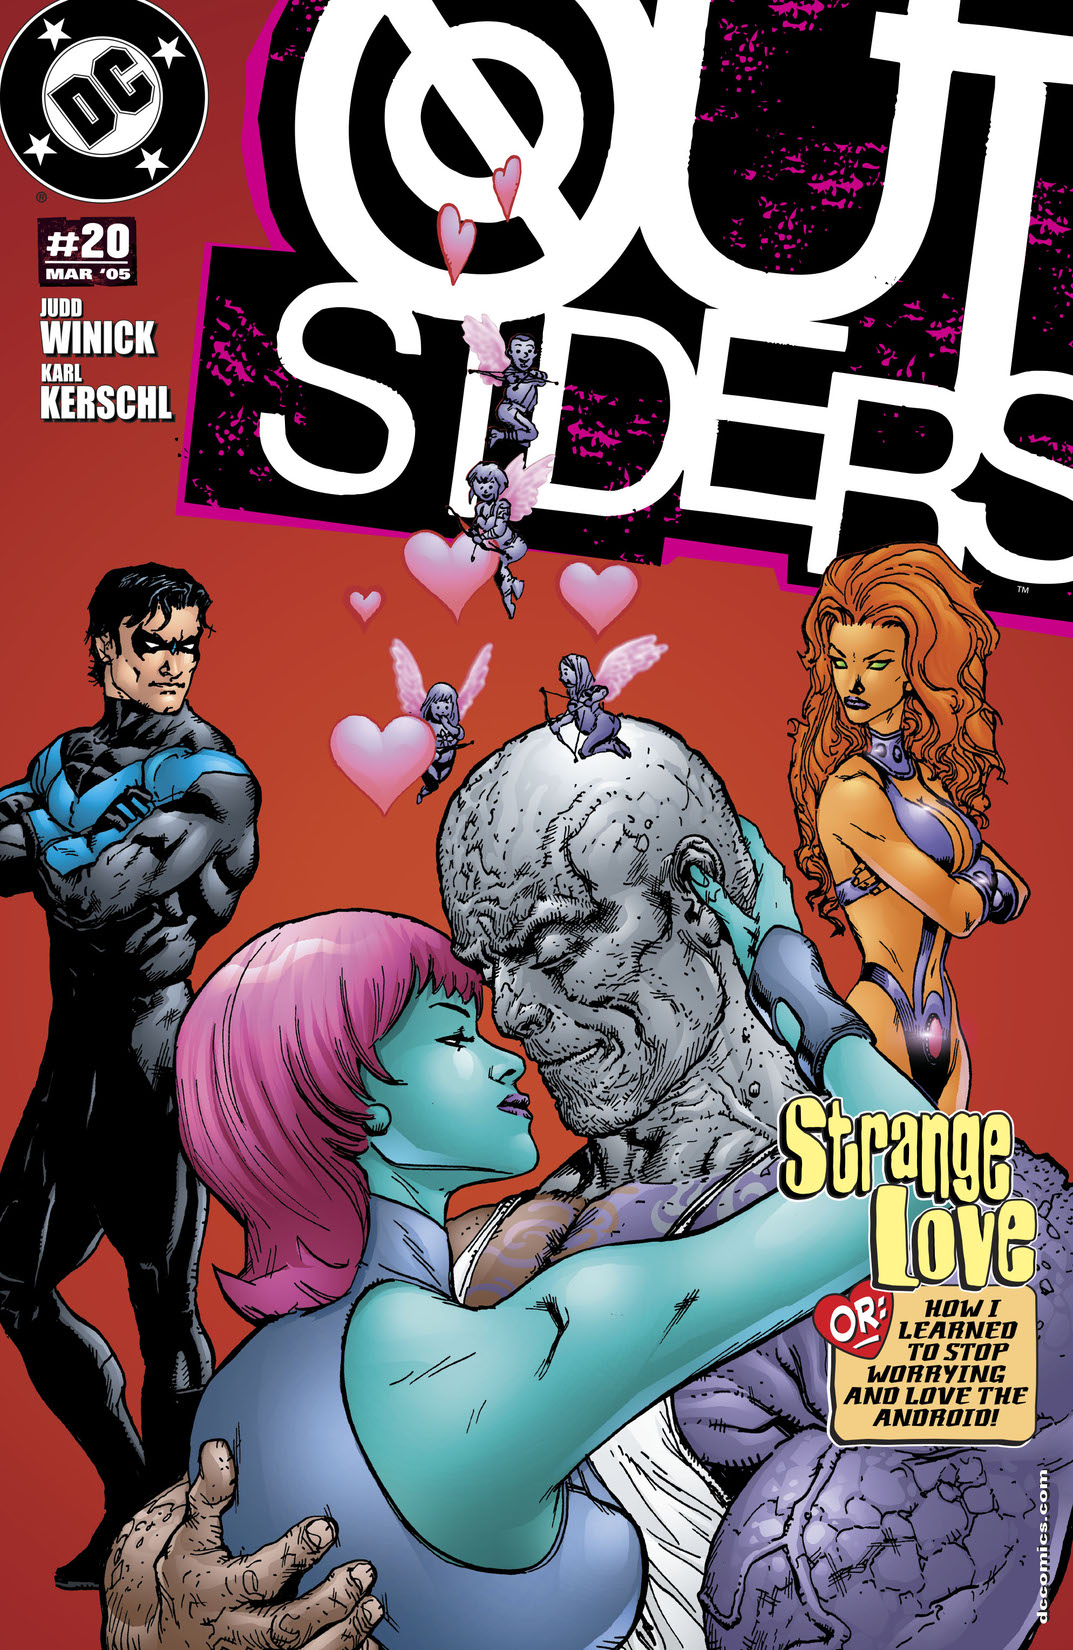 Outsiders (2003-) #20 preview images